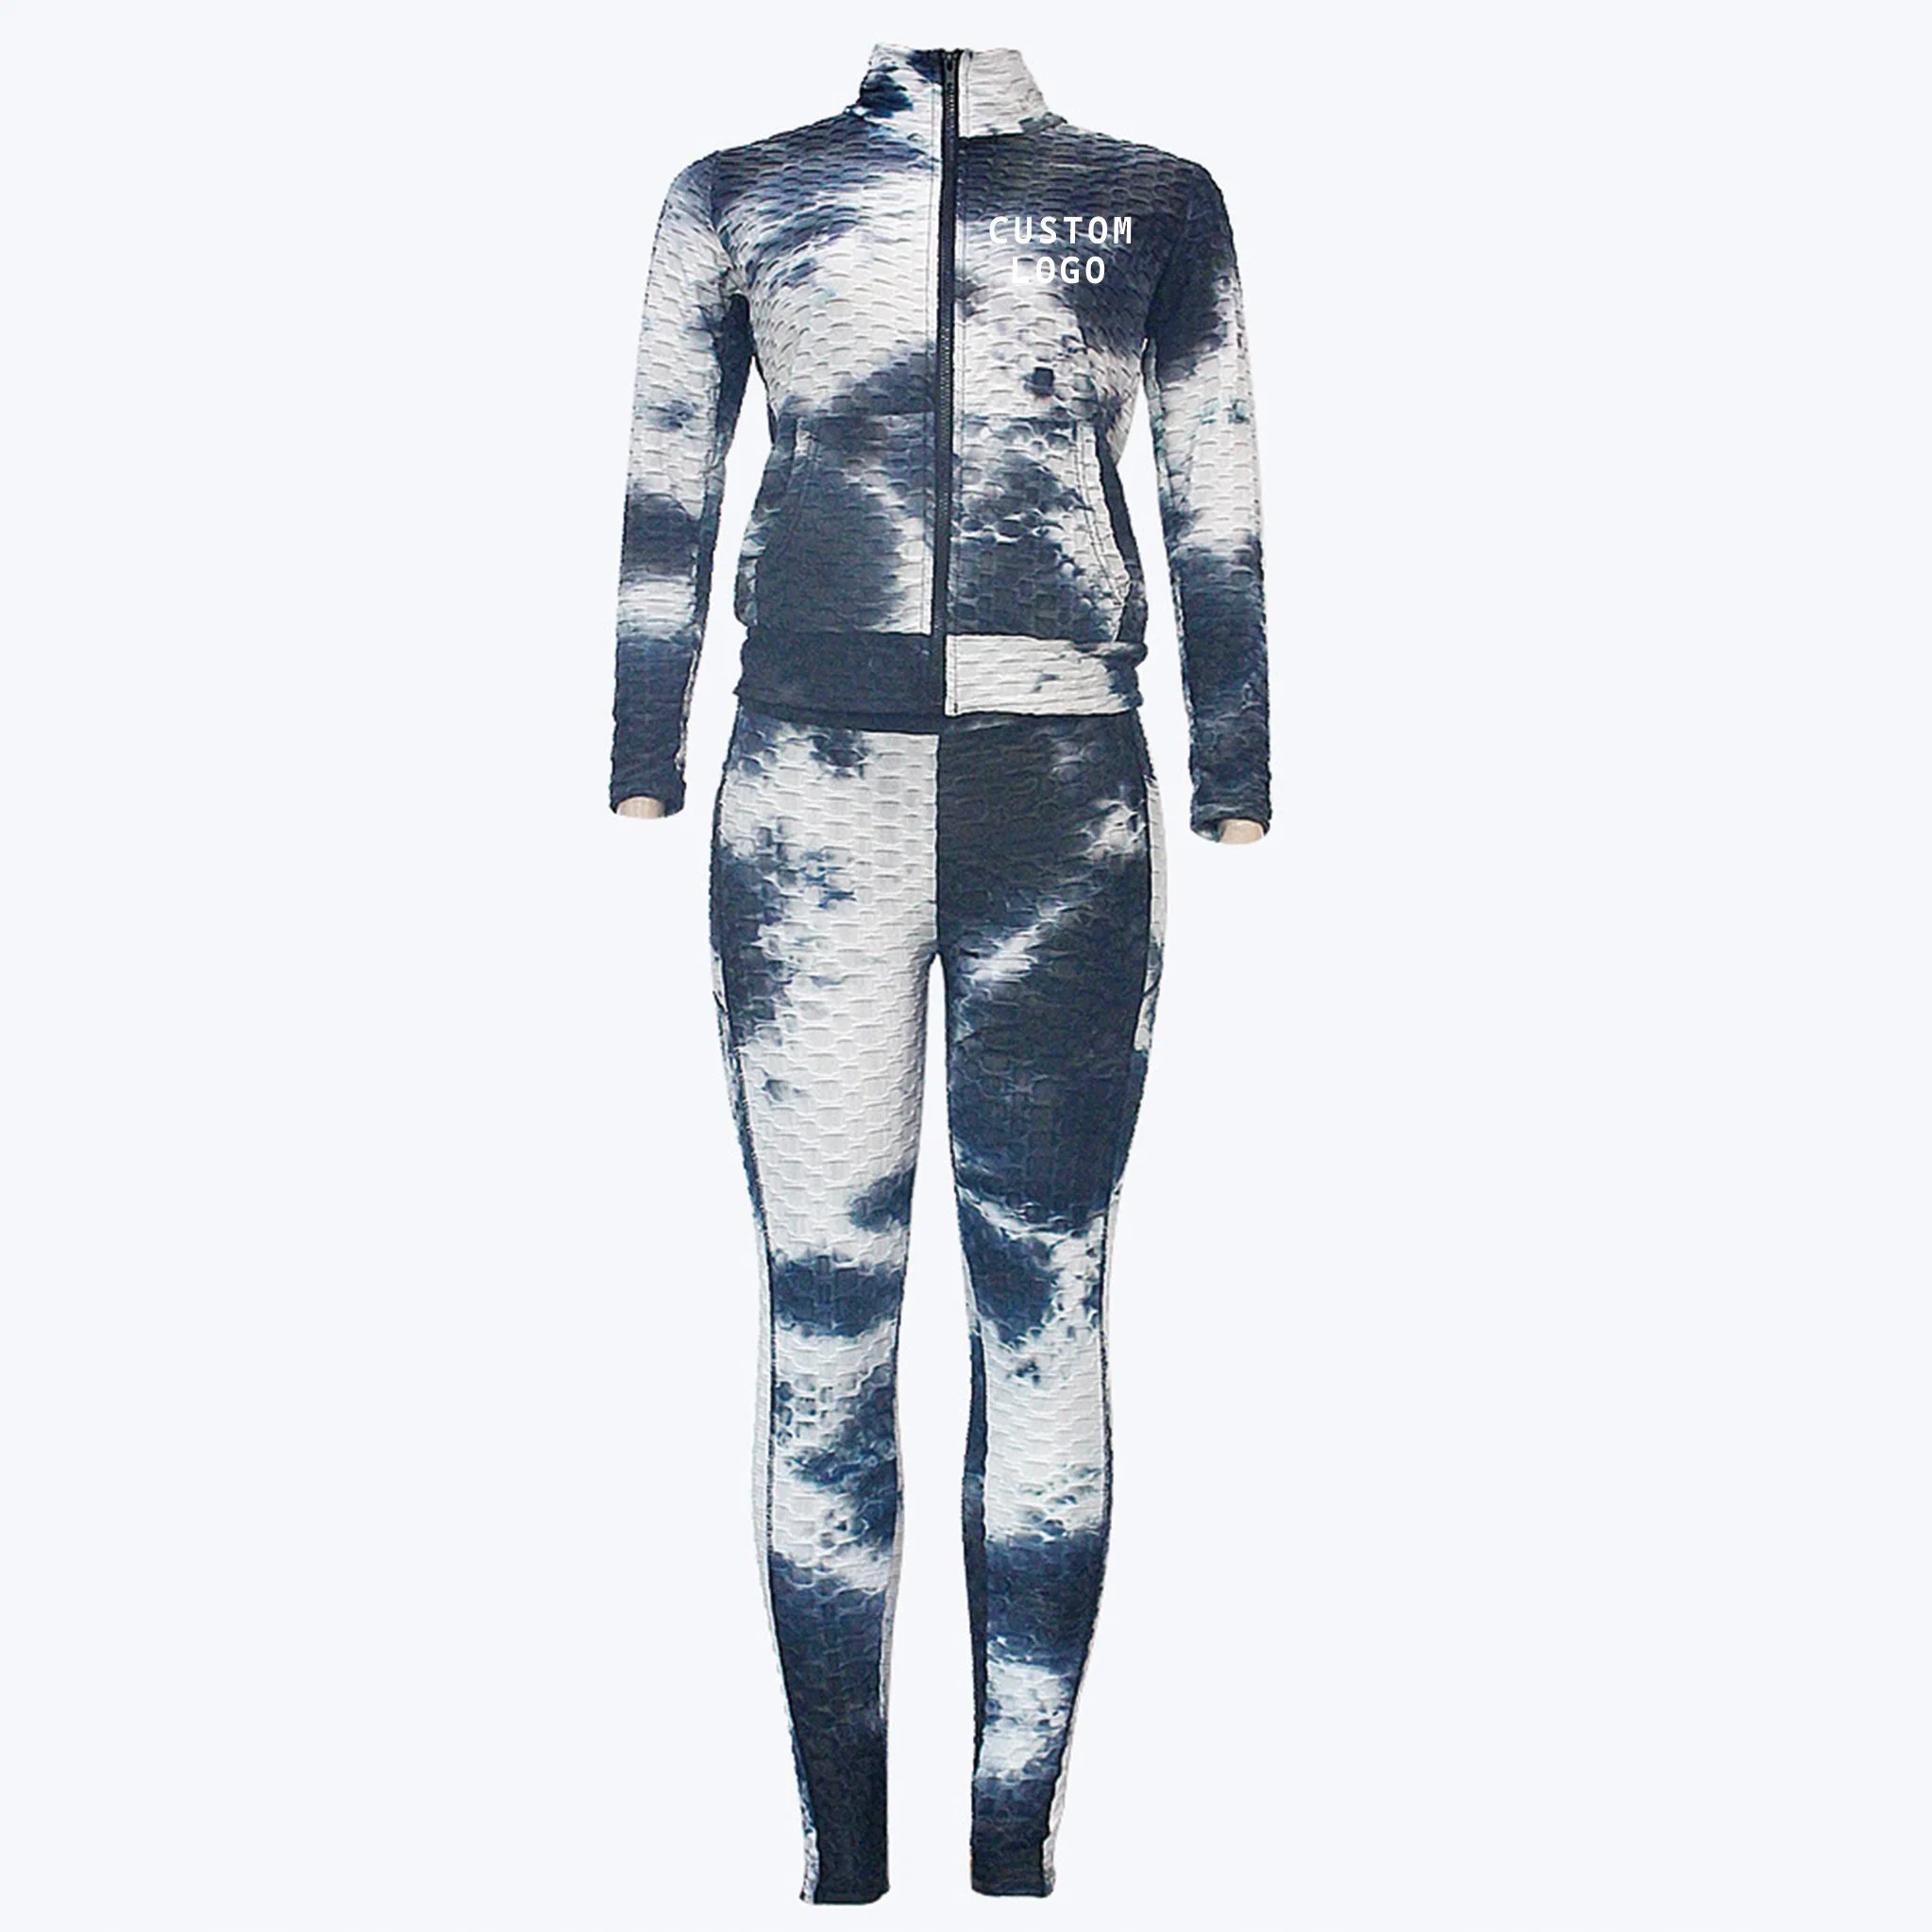 Tie Dye Sports Fitness Running Yoga Clothes Coat Pants Suit